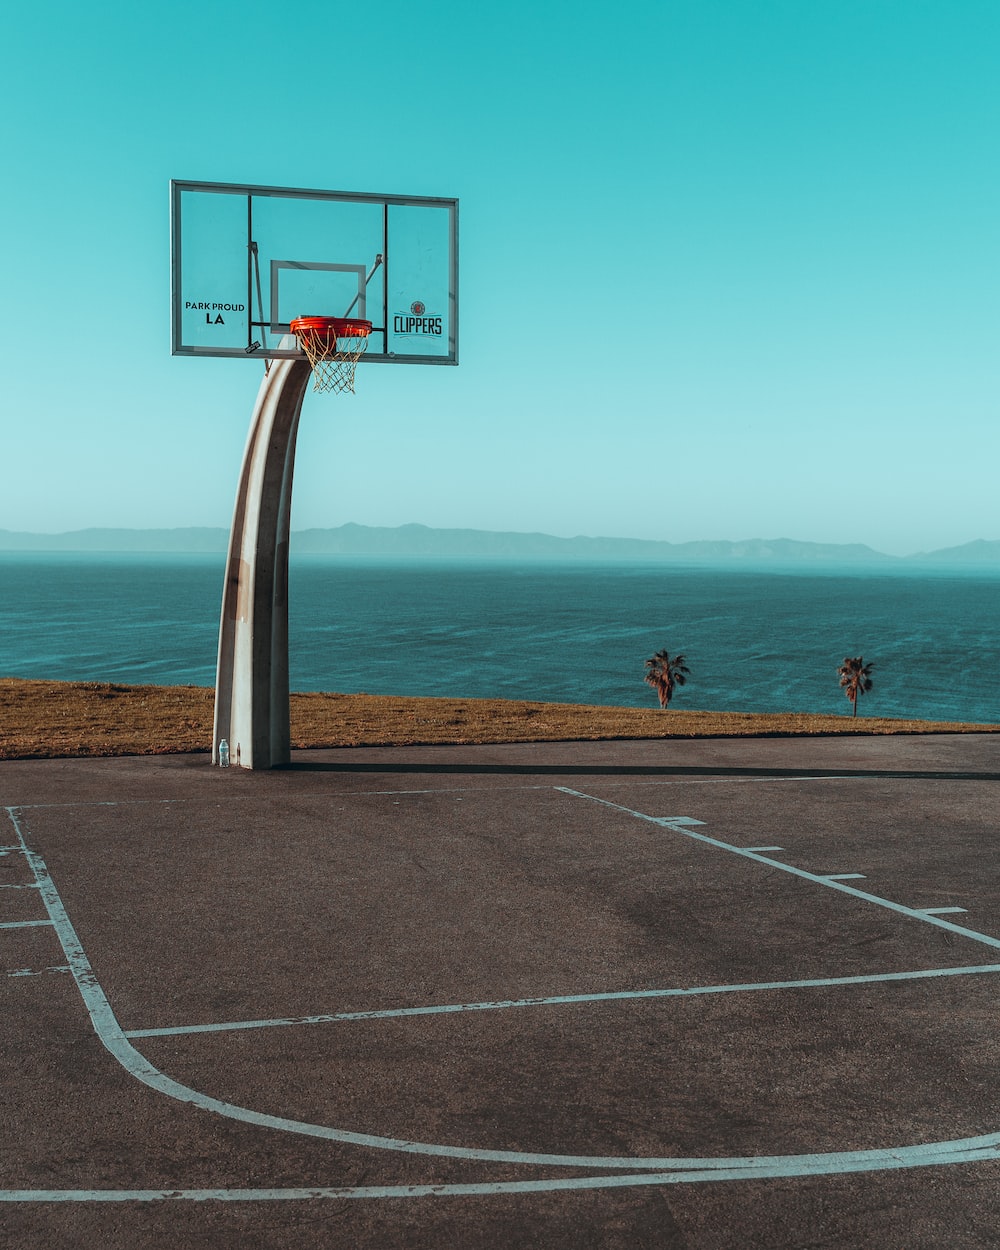 Basketball Court Picture. Download Free Image